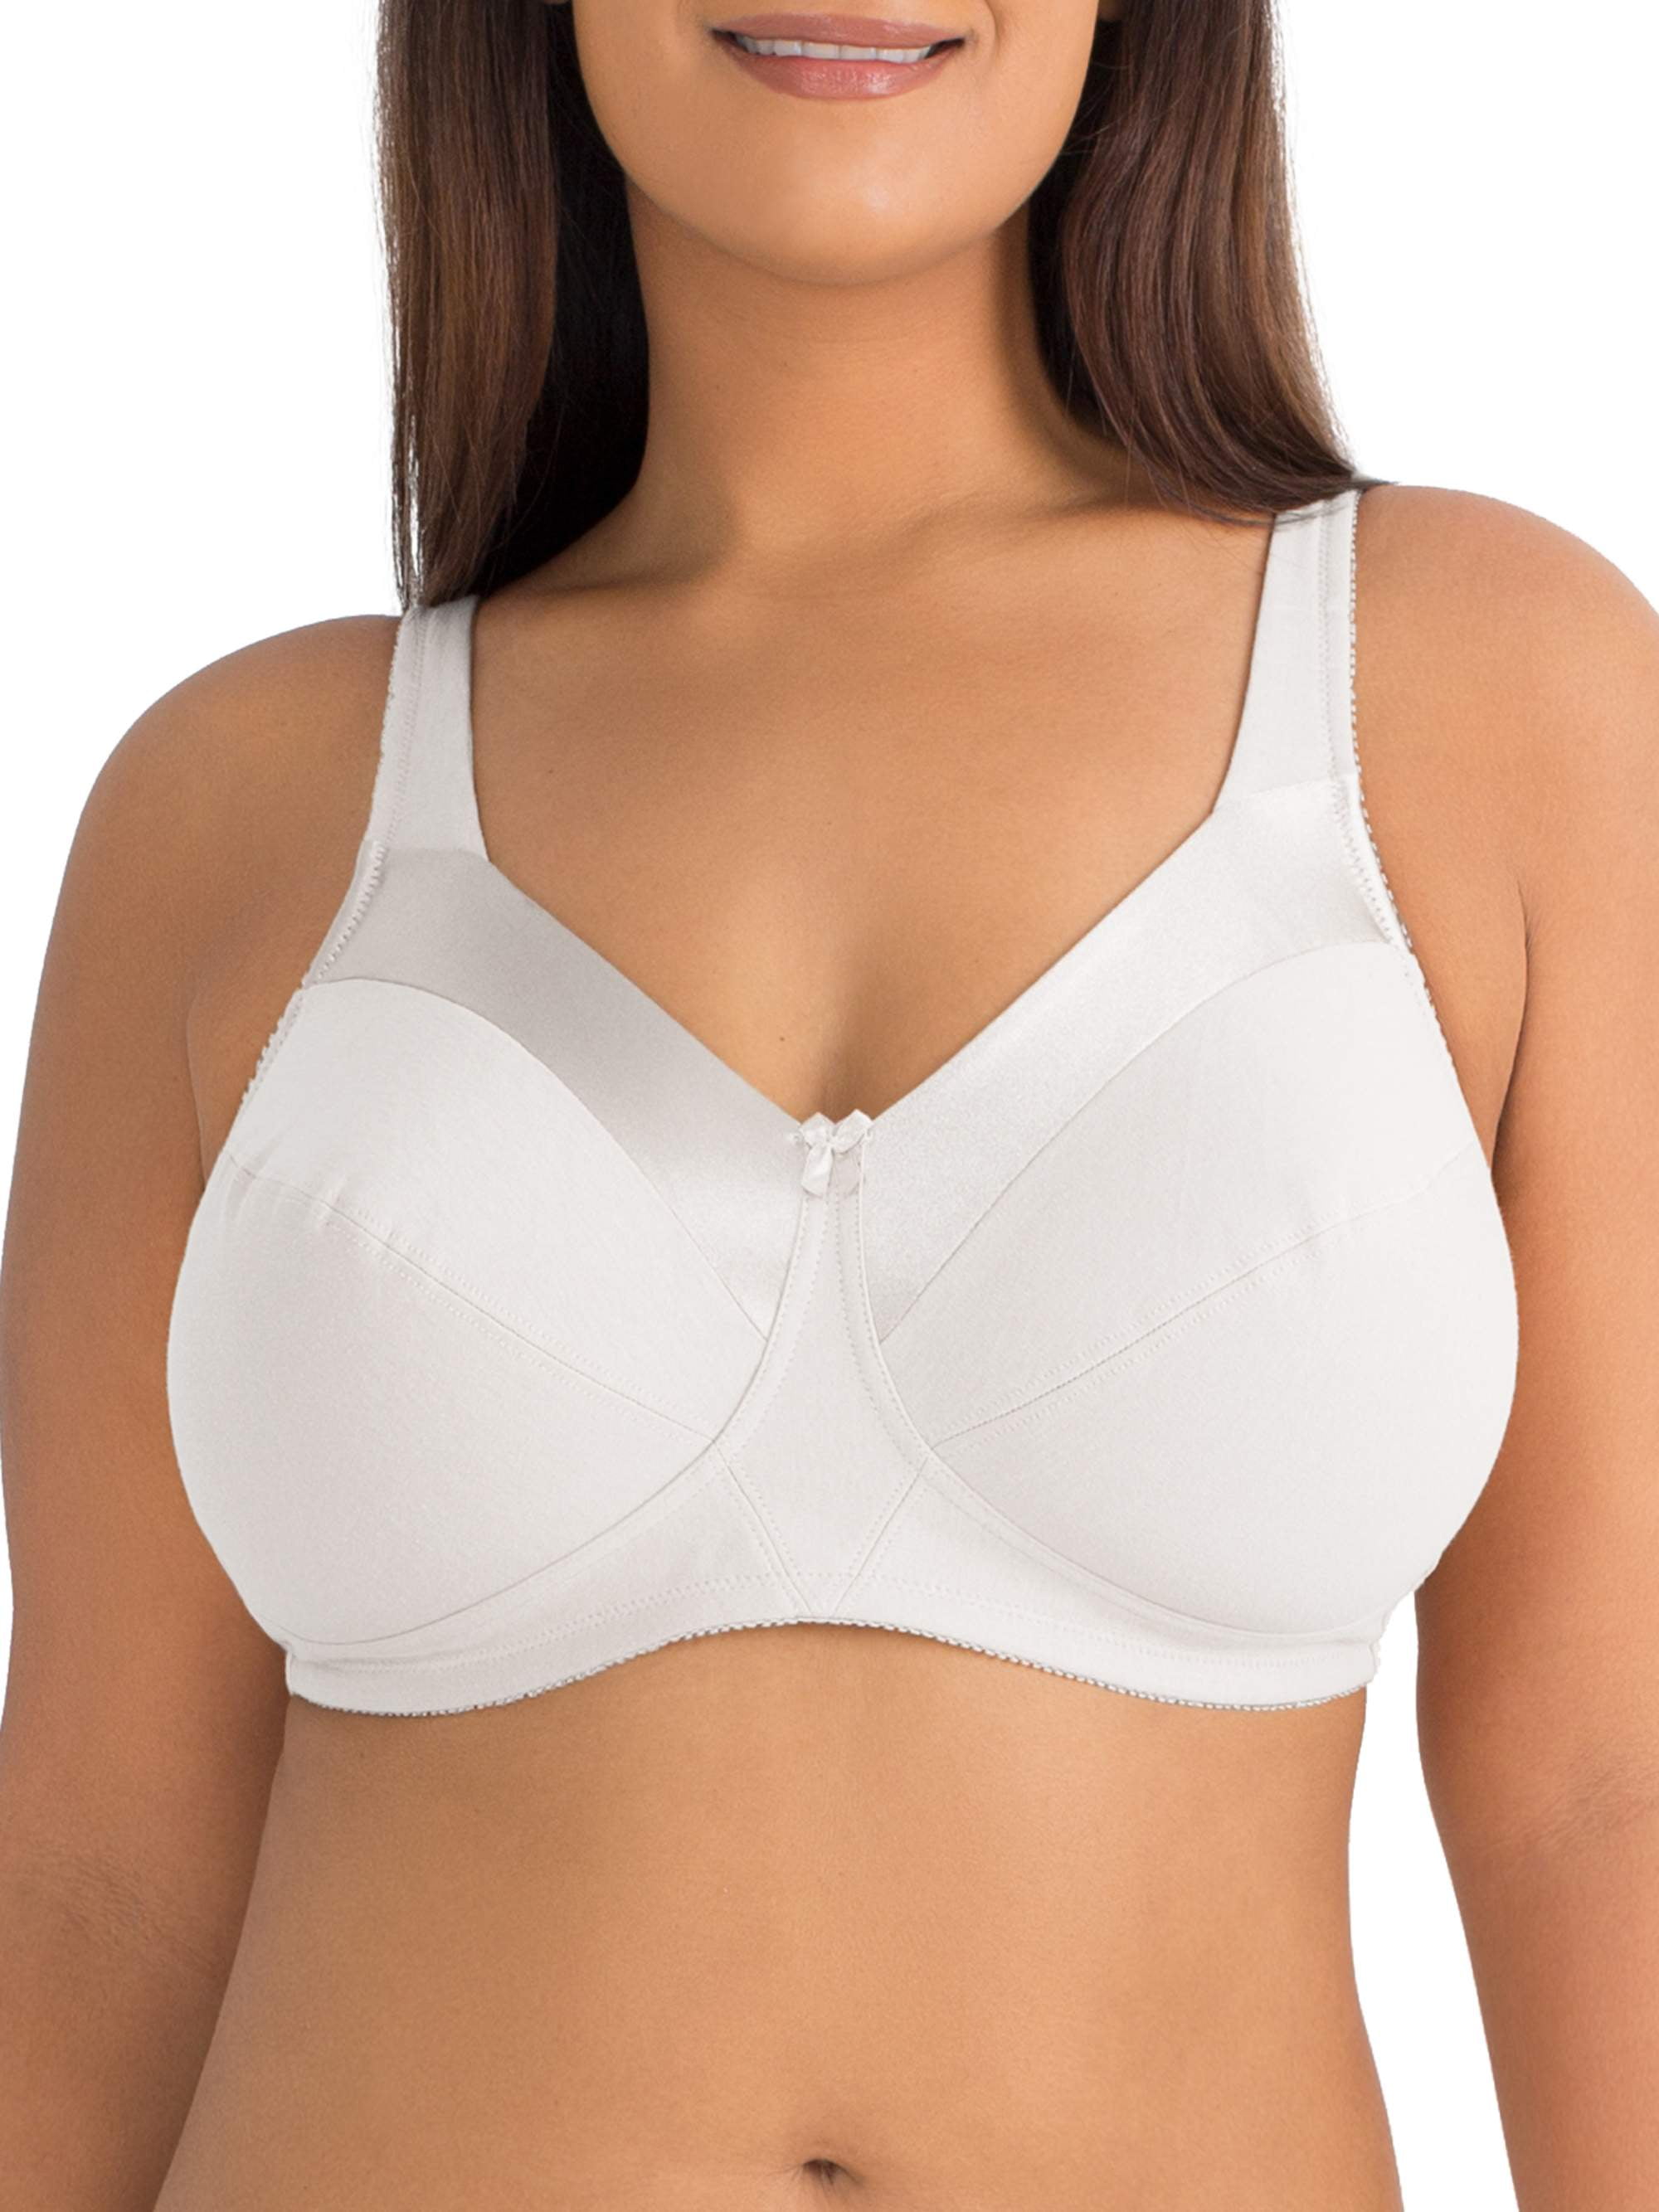 Fruit of the Loom Women's Plus Size Wirefree Bra, Style 96715